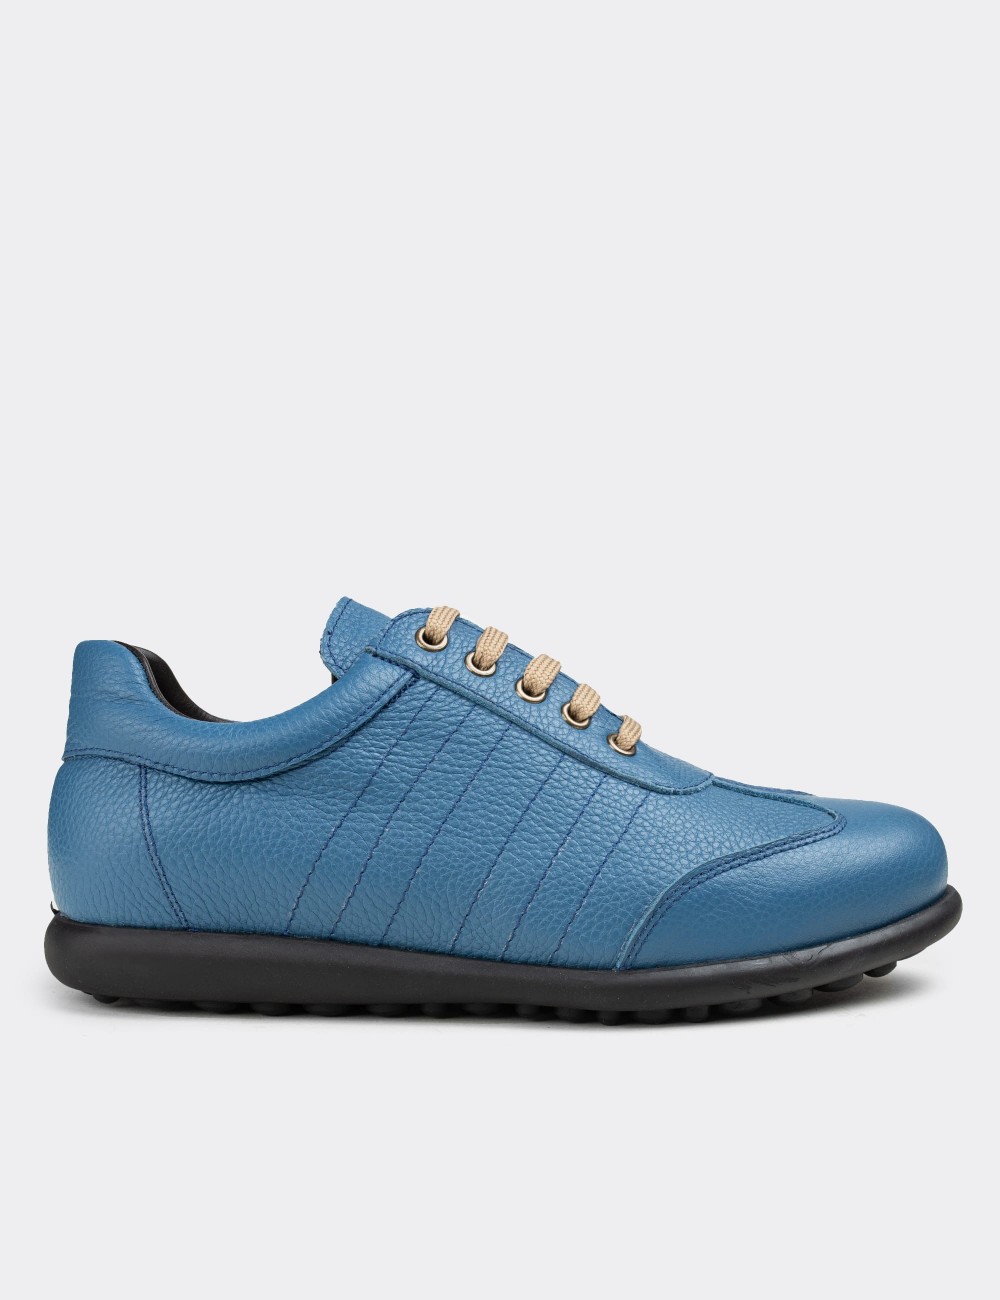 Blue  Leather Lace-up Shoes - 01826MMVIC02